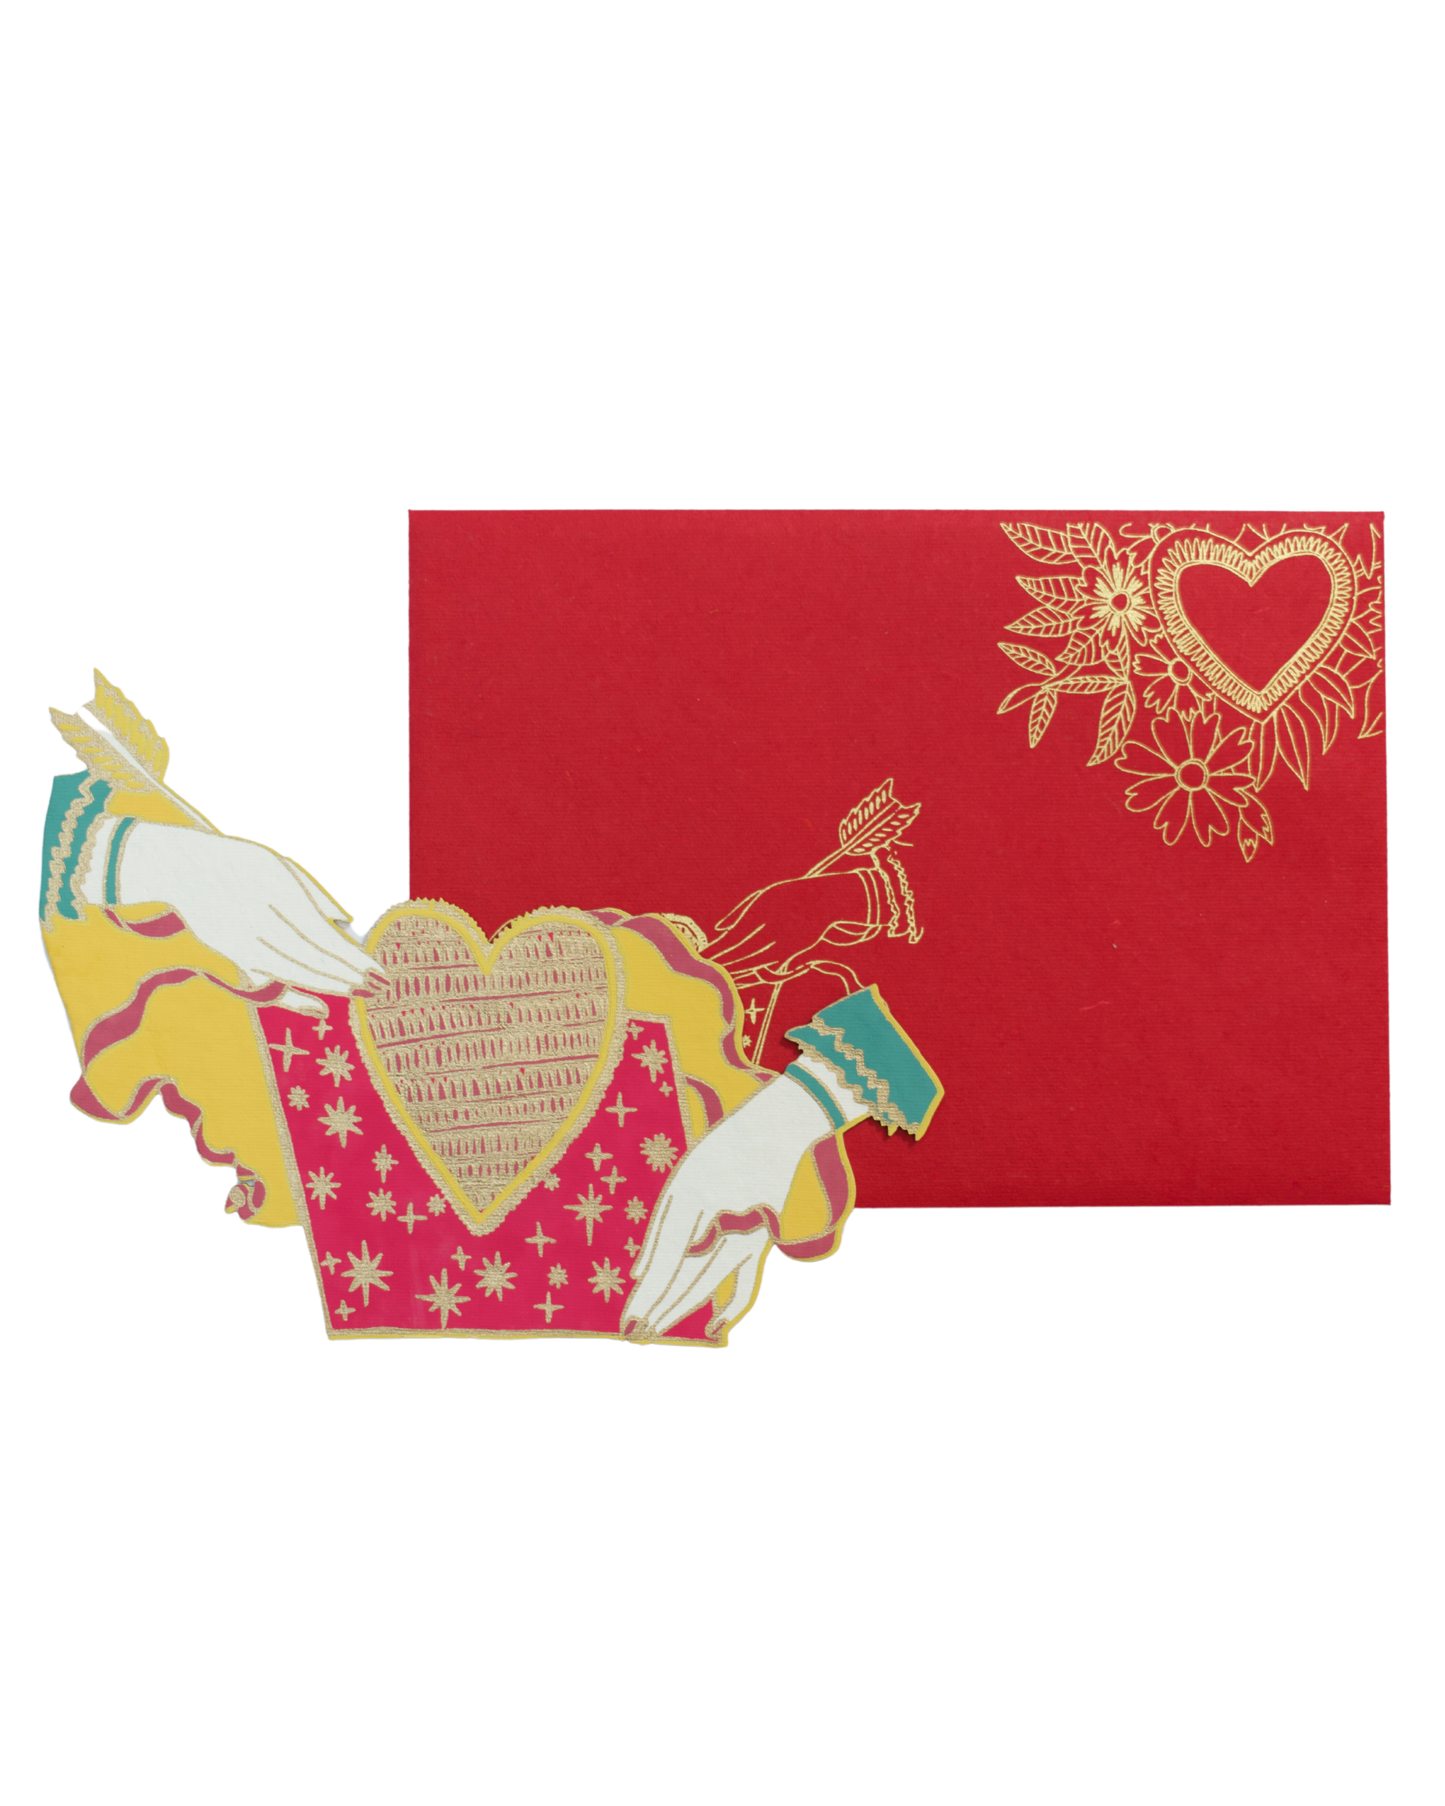 Heart and Hands Greeting Card